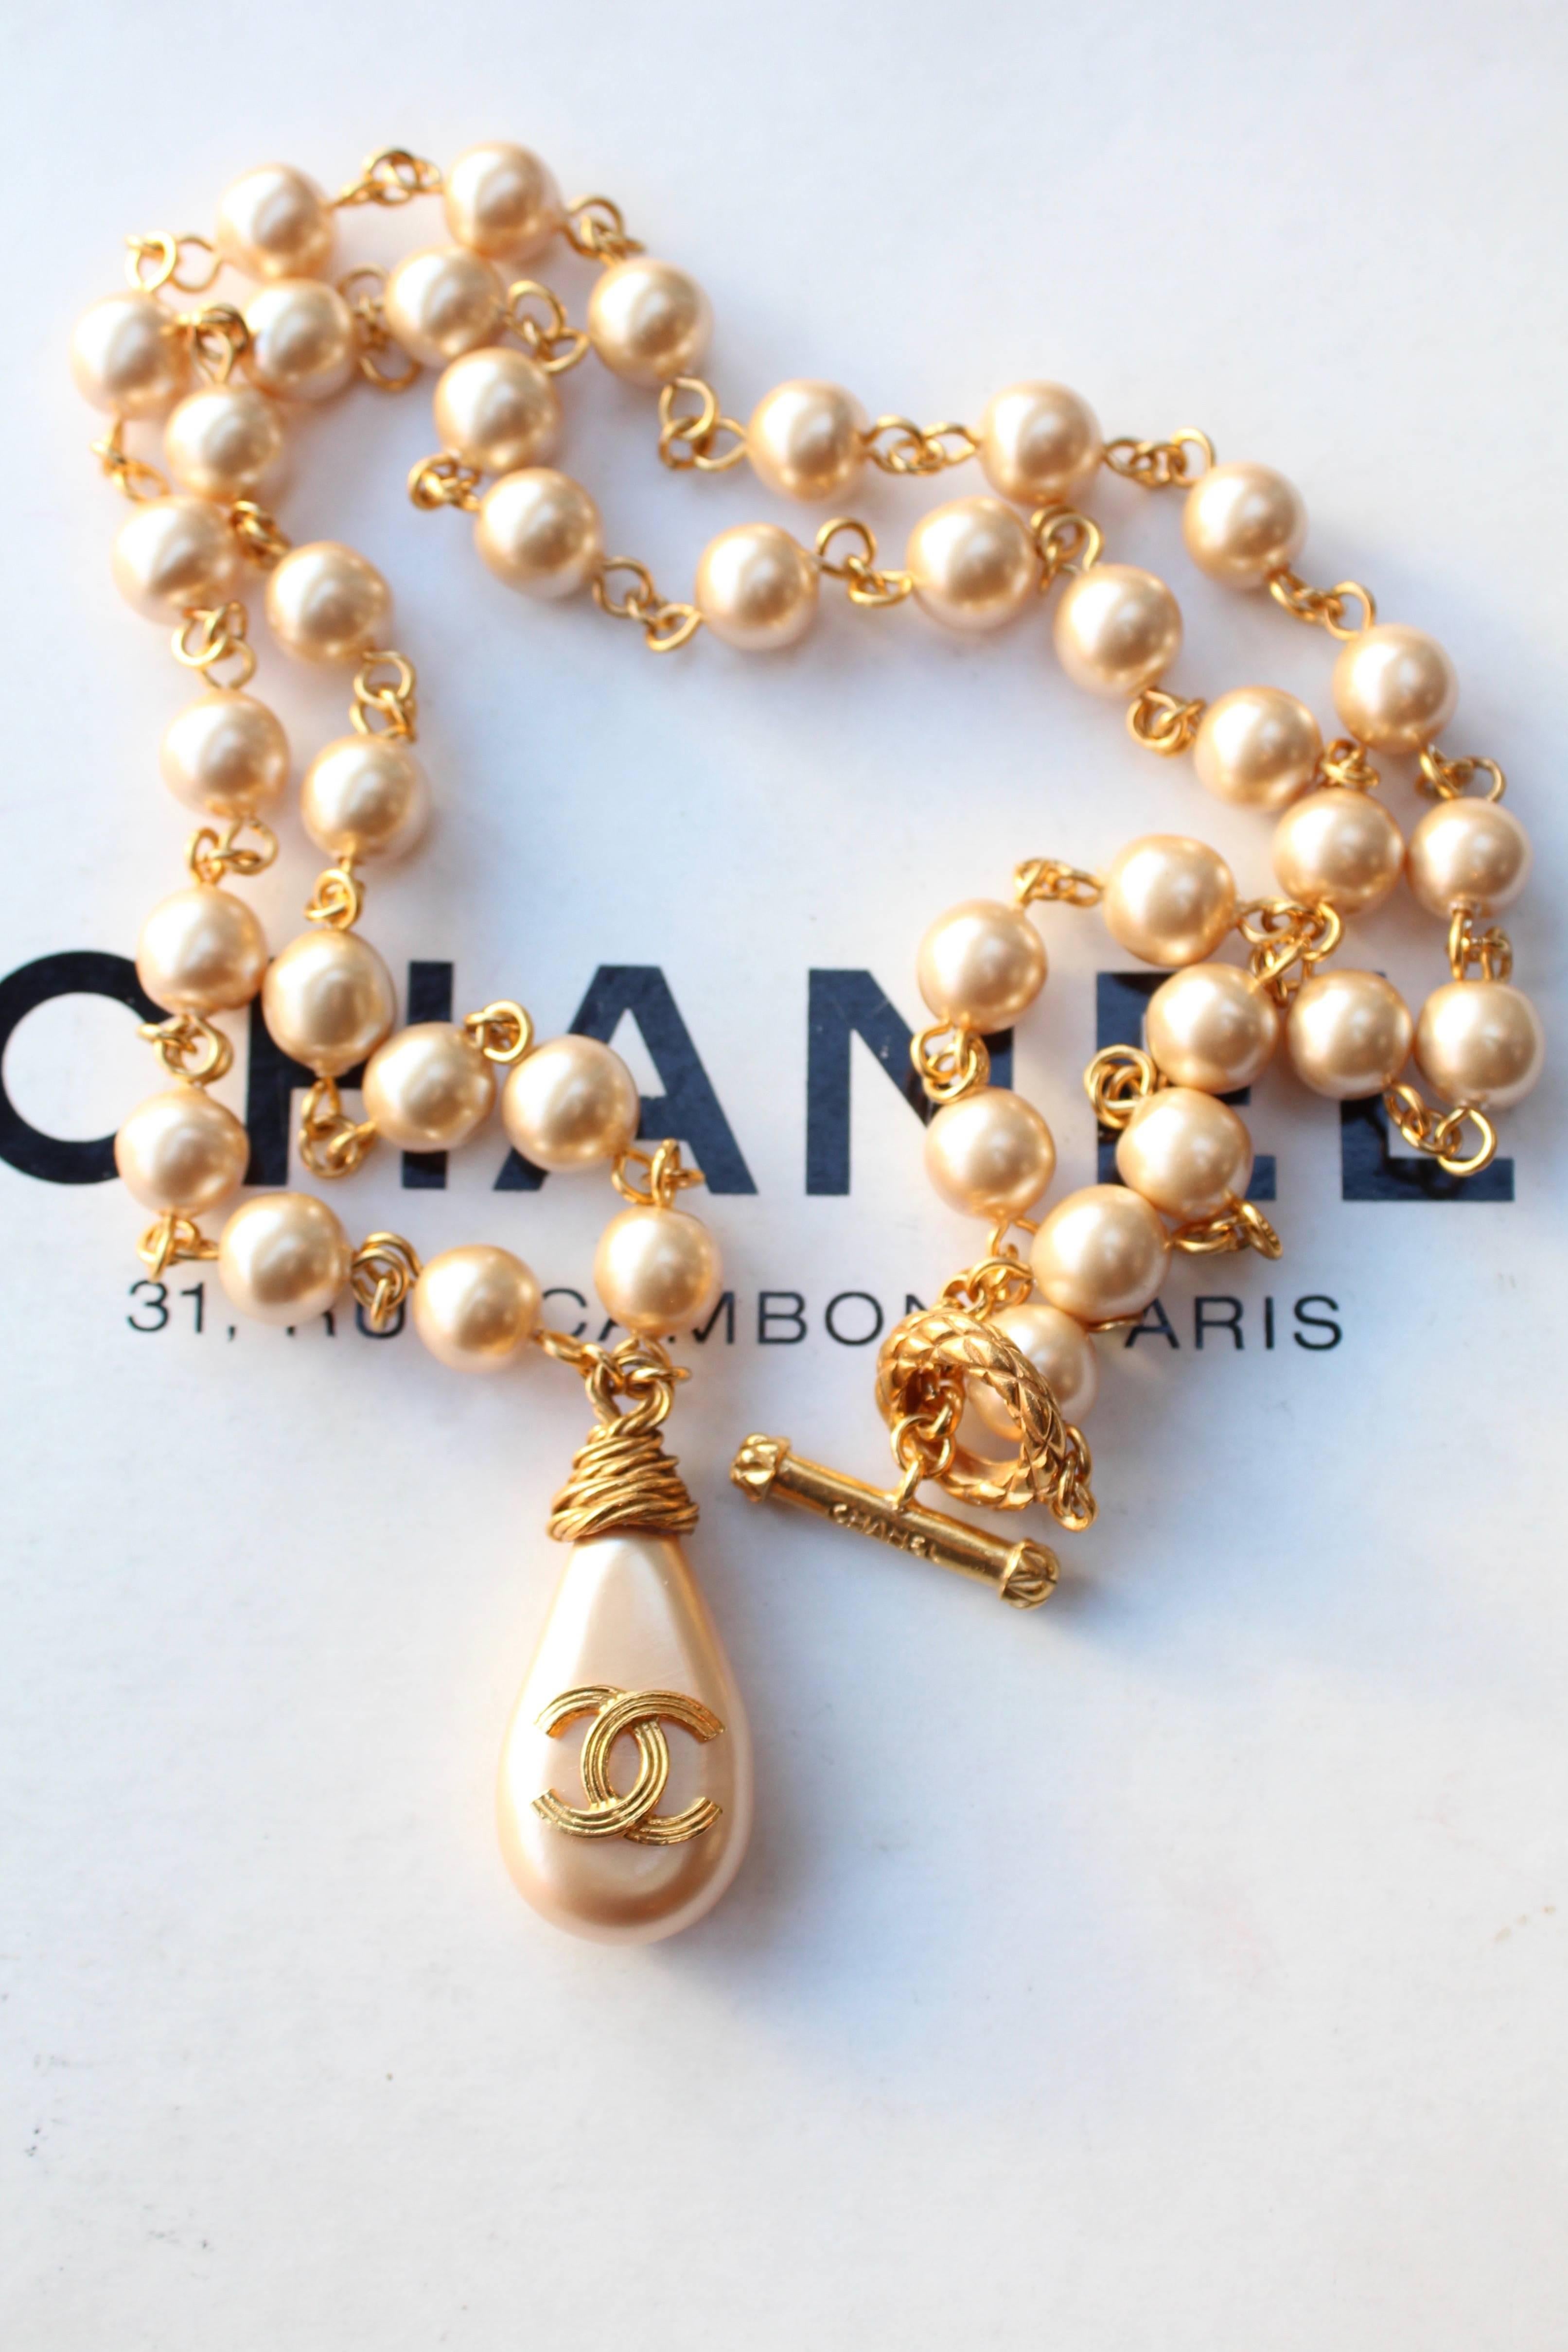 Women's Spring 1994 Chanel pearly beads long necklace with “calisson” shaped pendant